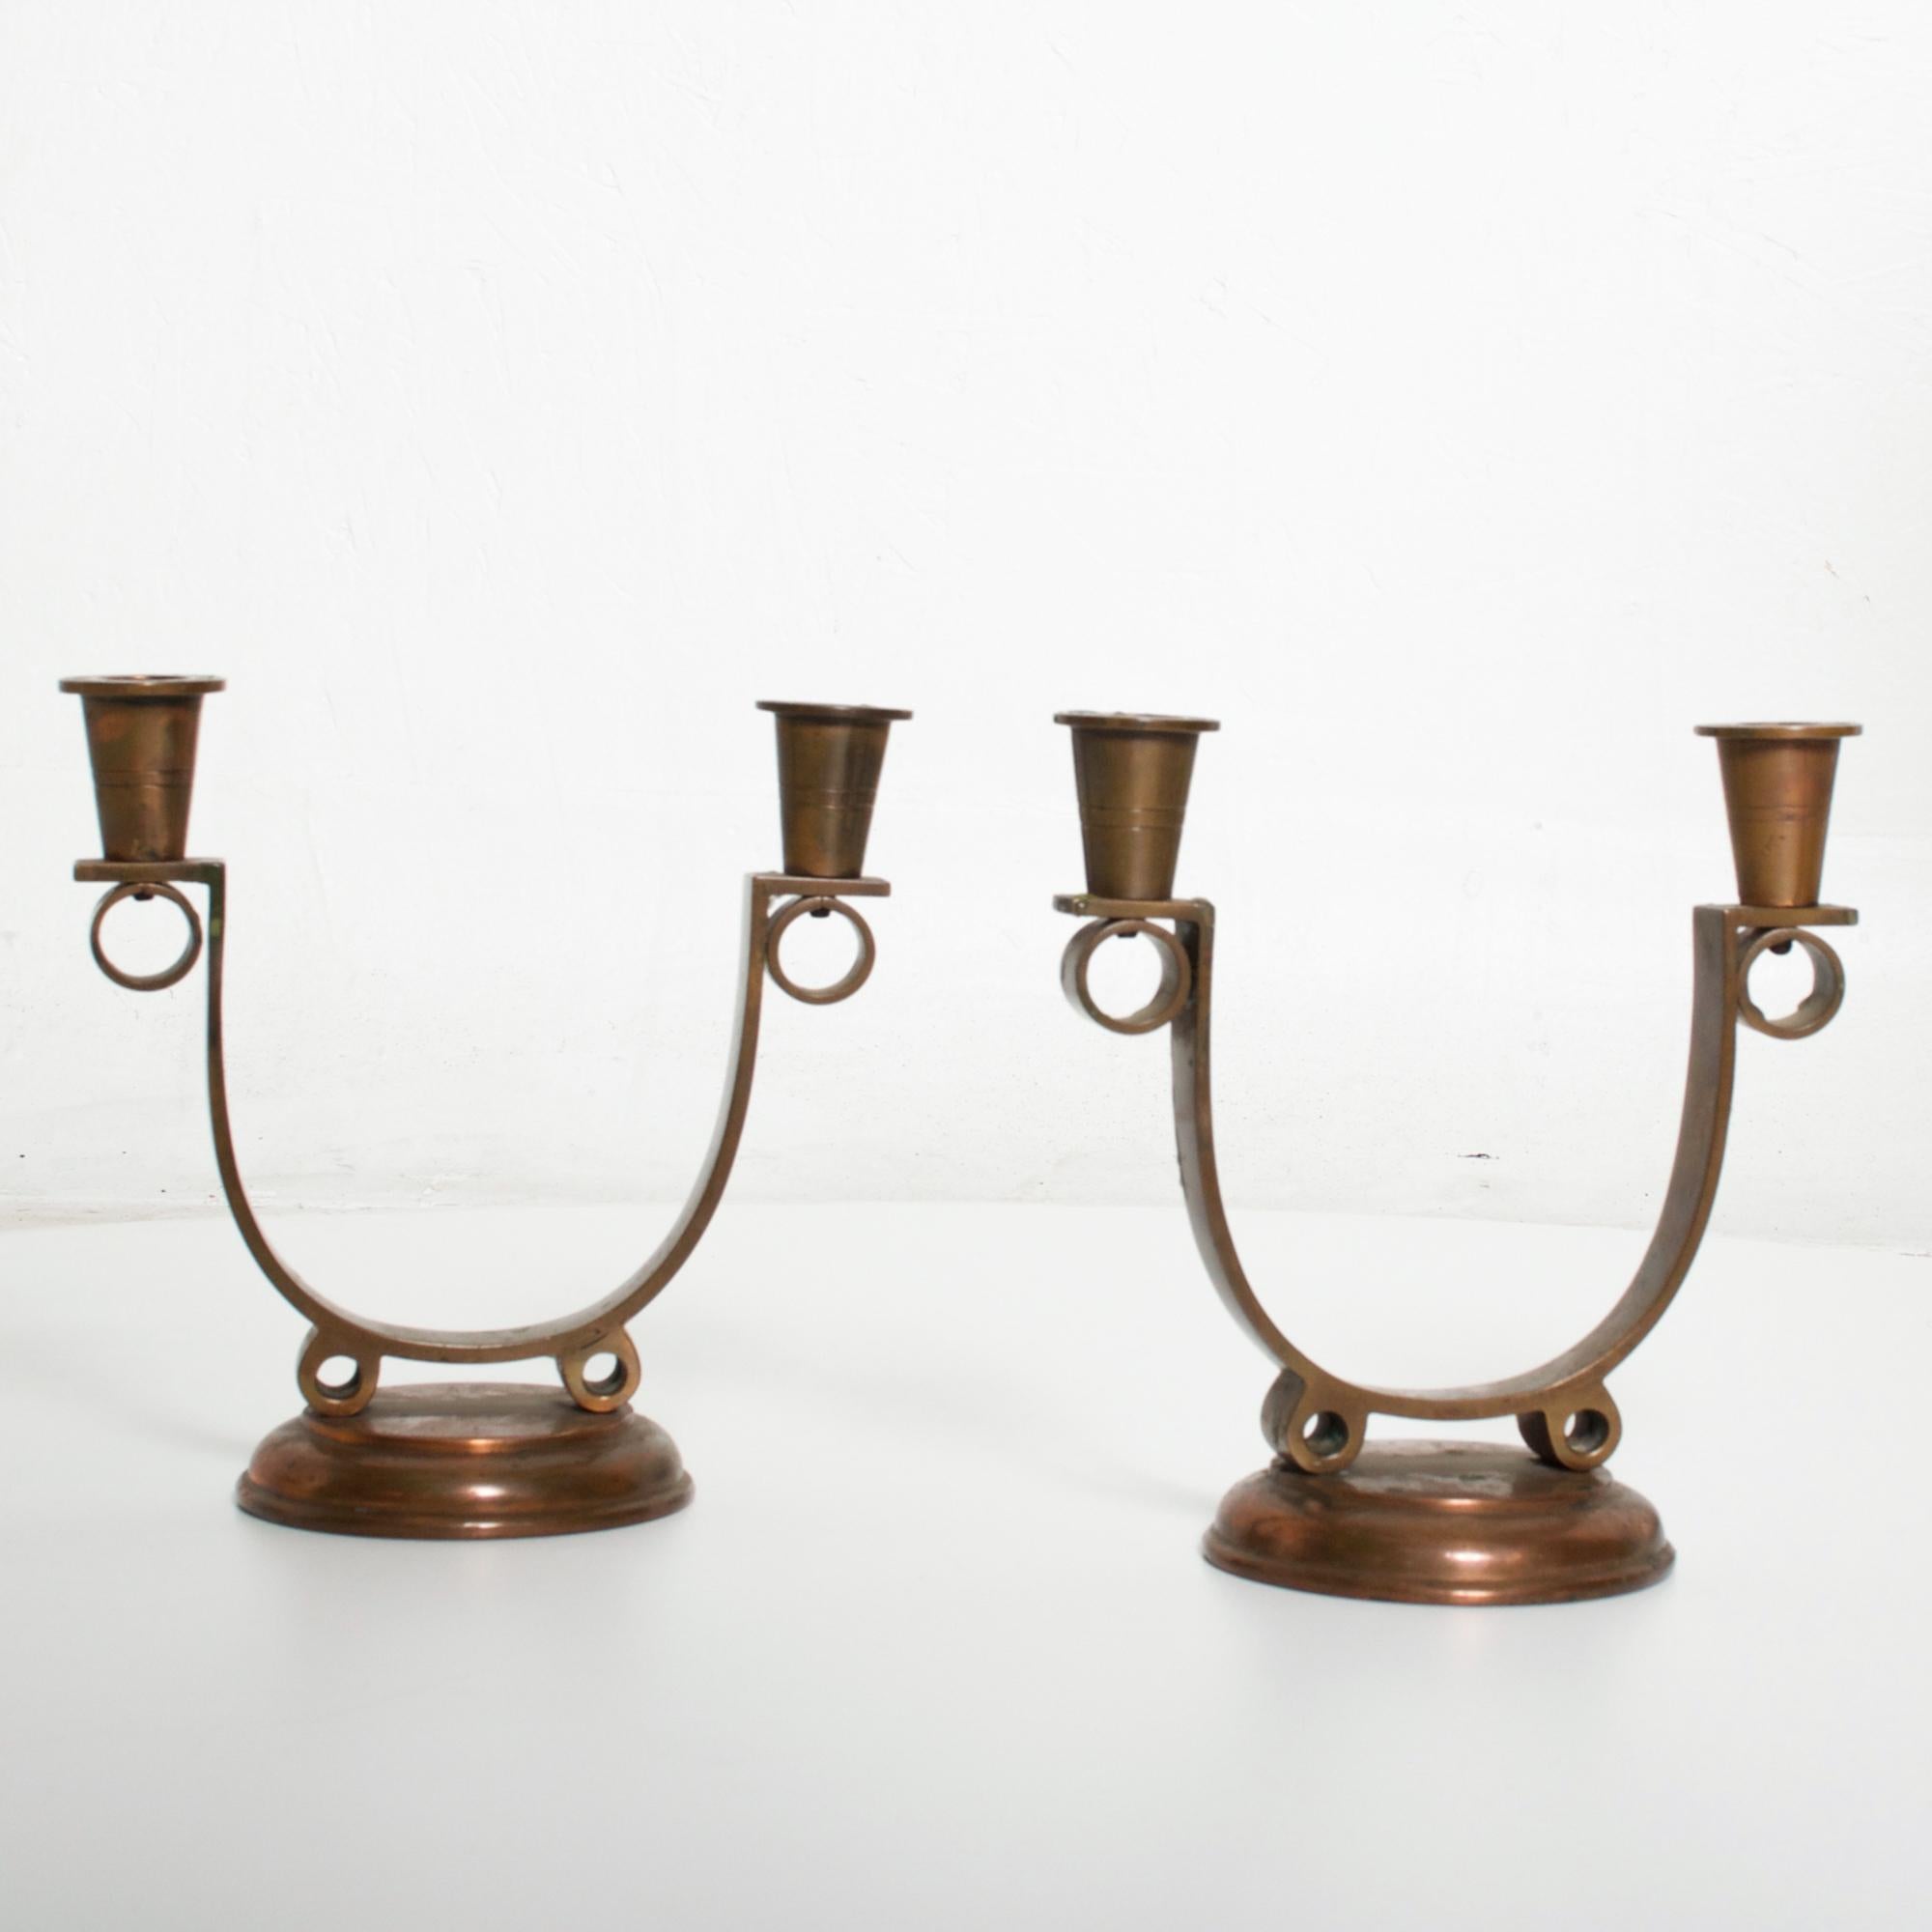 Swoop arm Art Deco copper candle stick holder pair double arm design
Displays four candles. Two each holder.
Attributed to design style of Roycroft Metalwork New York
Double arm on a cupped base
Good condition. Original unrestored vintage condition.